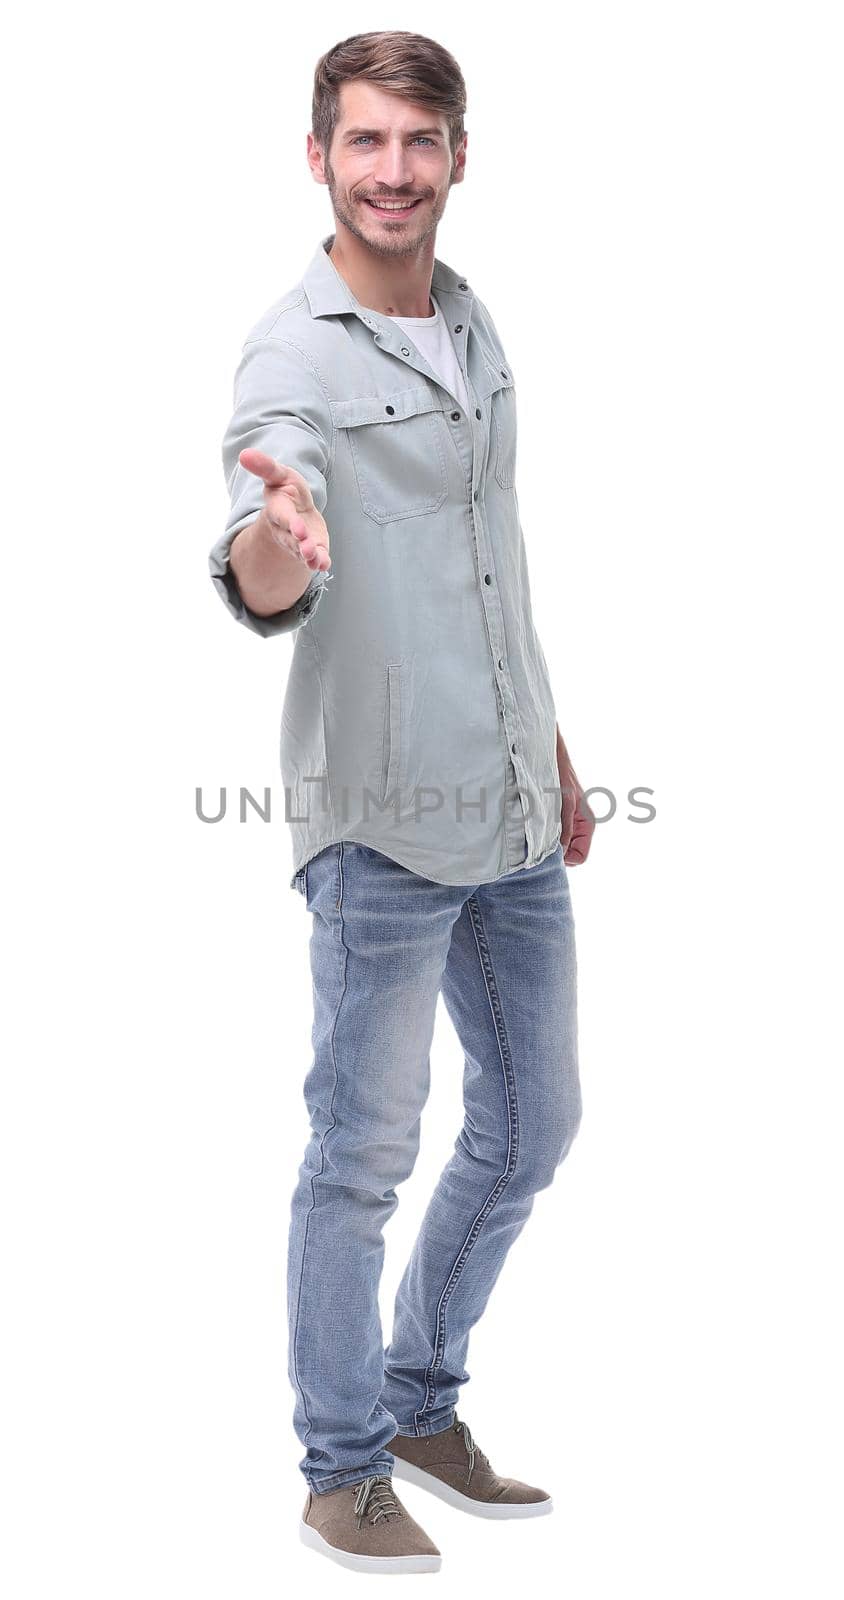 in full growth.young man holding out his hand for a handshake.isolated on white background